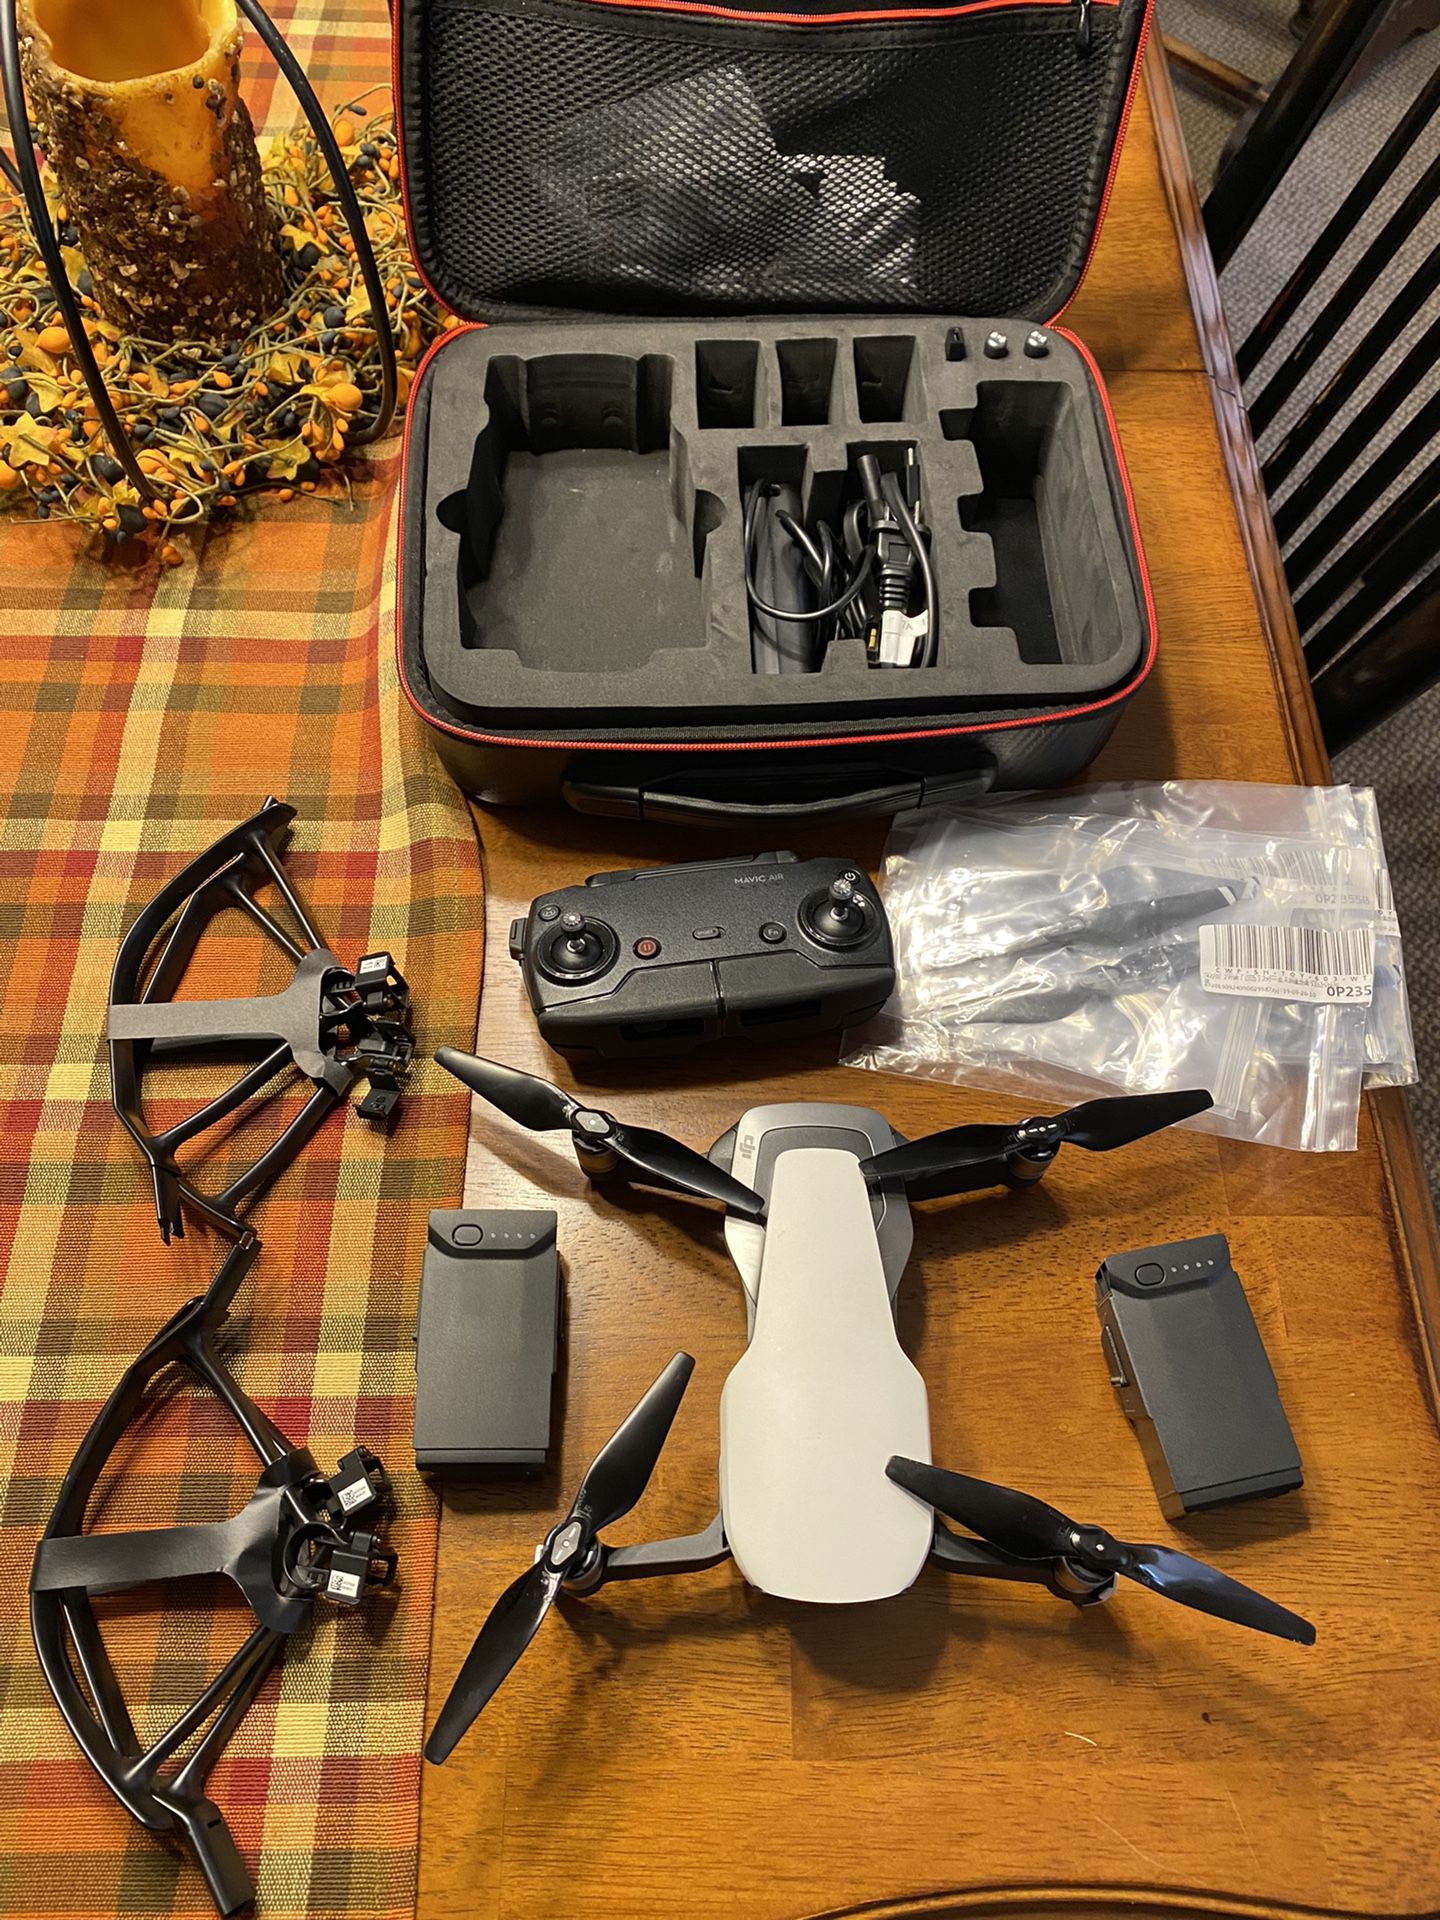 DJI Mavic Air Drone With Fly More Package And Extras